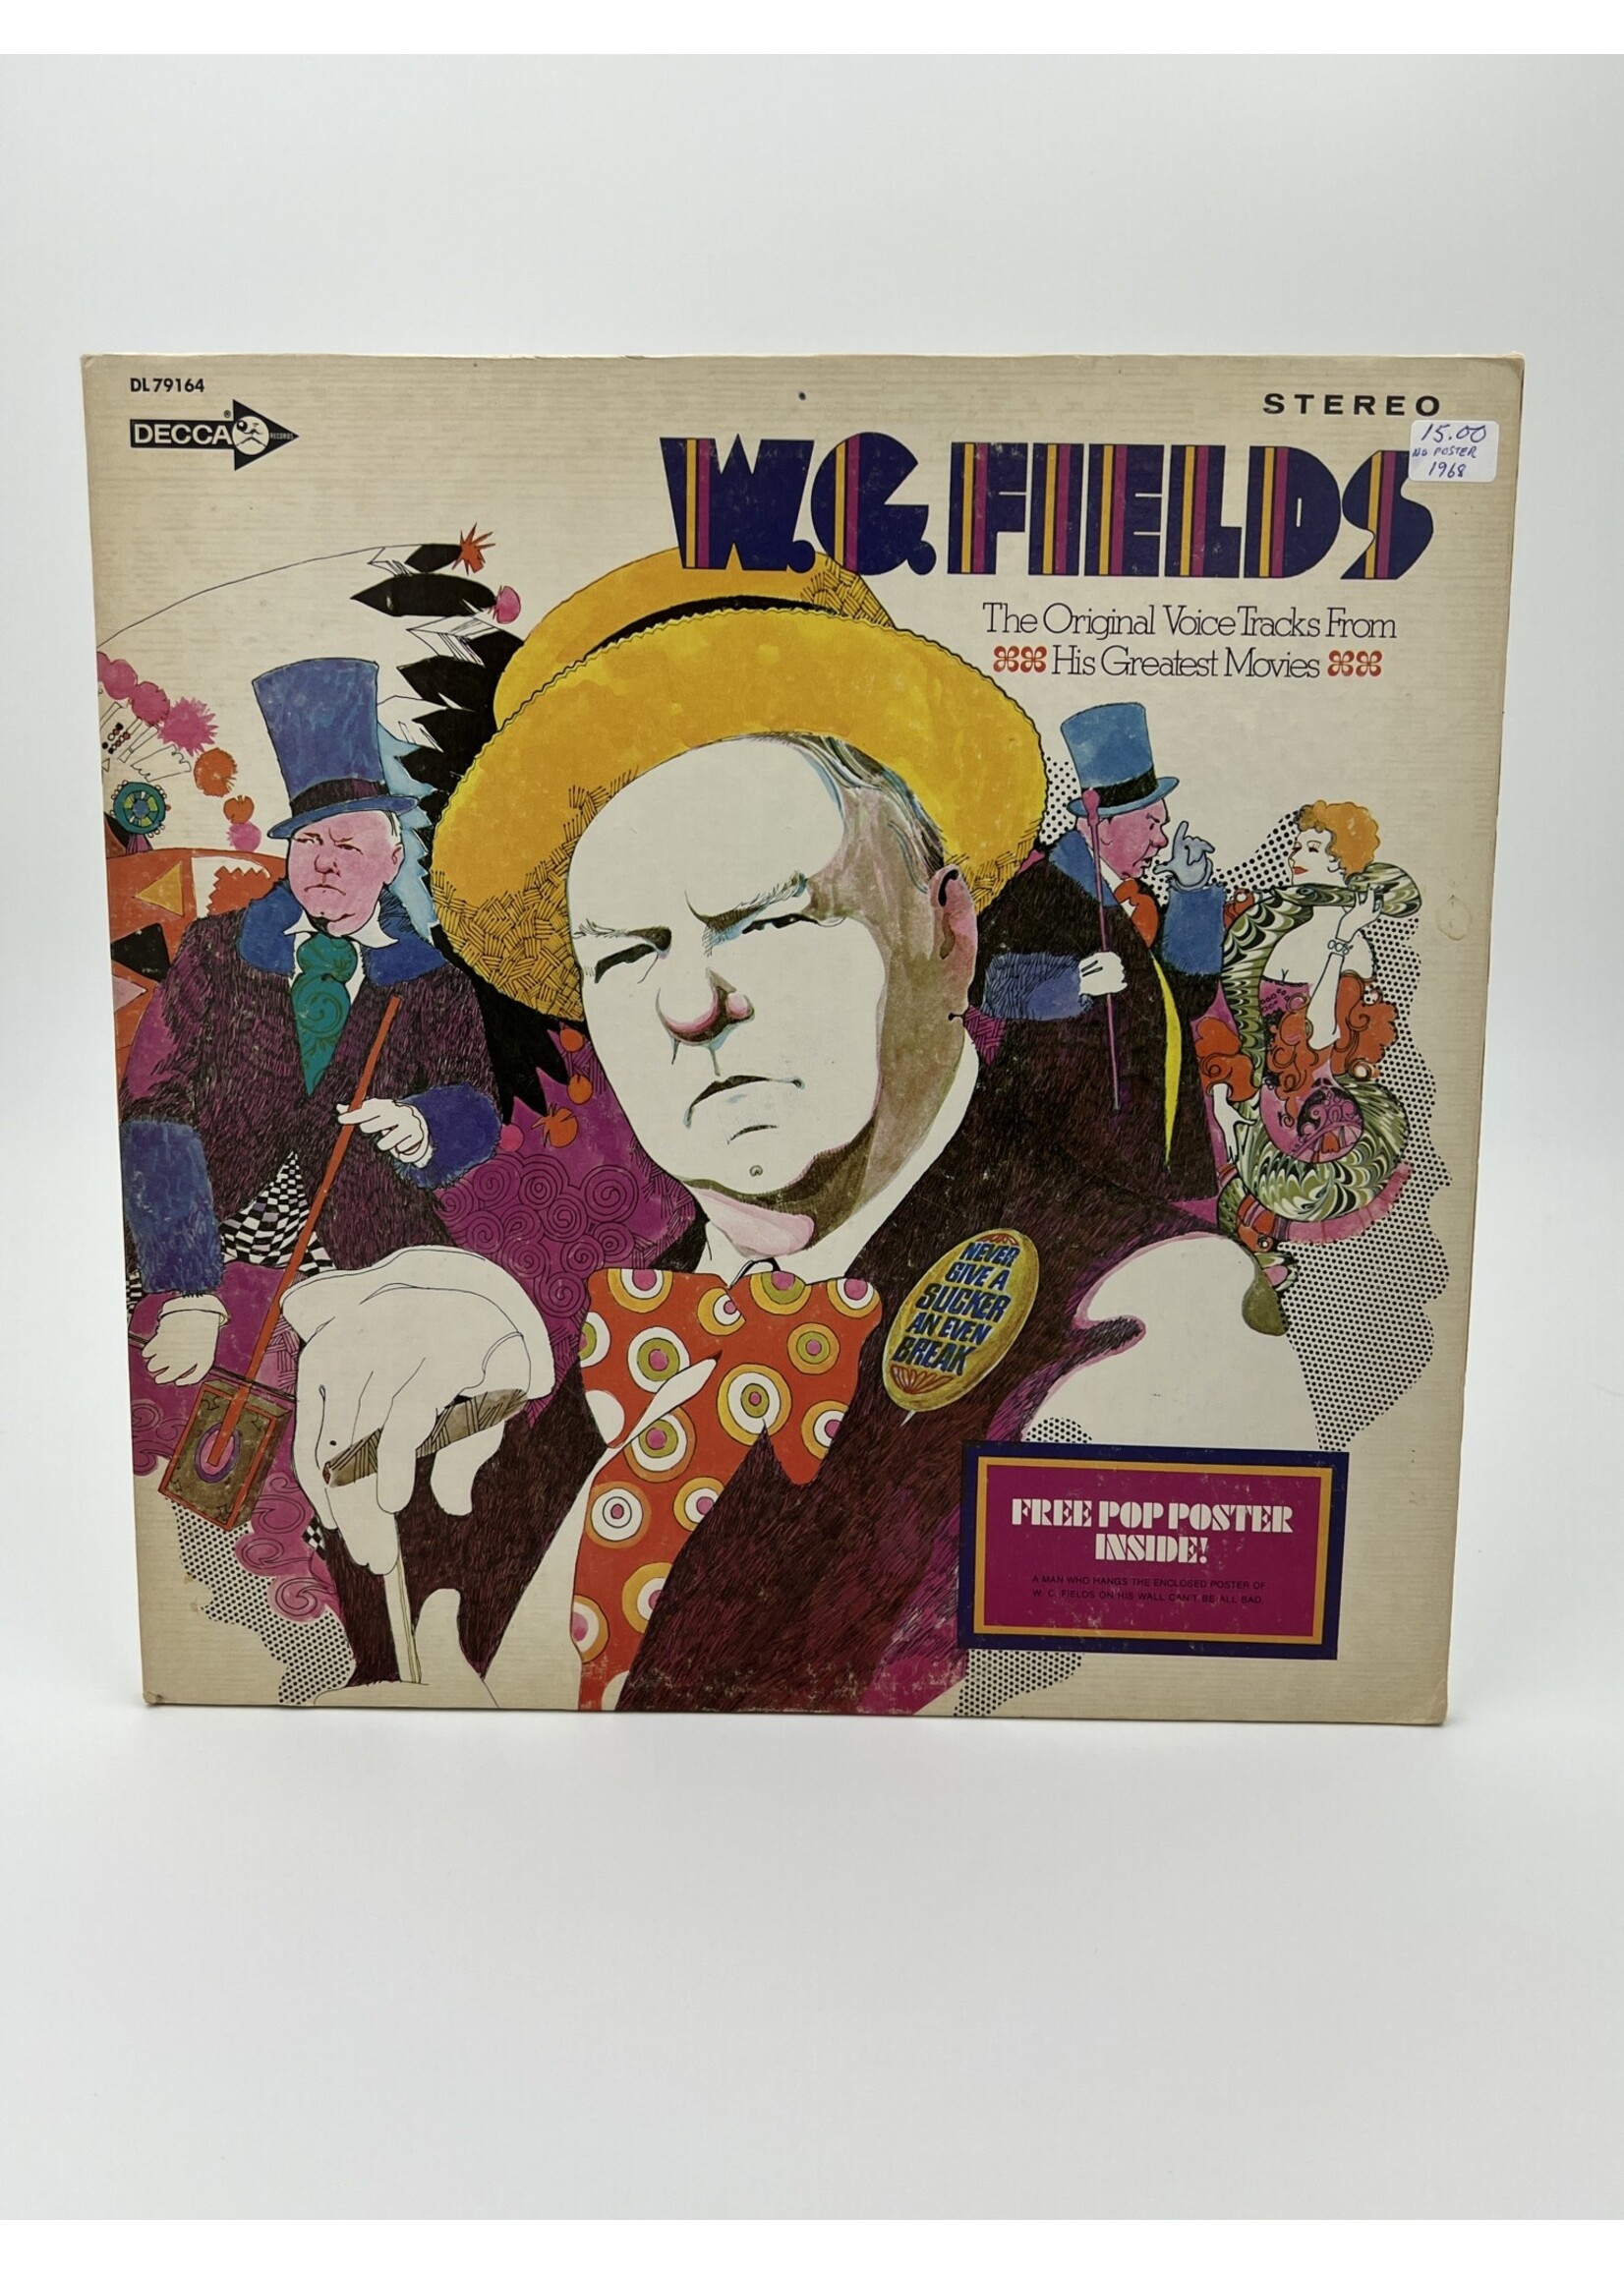 LP   WC Fields The Original Voice Tracks From His Greatest Movies LP Record